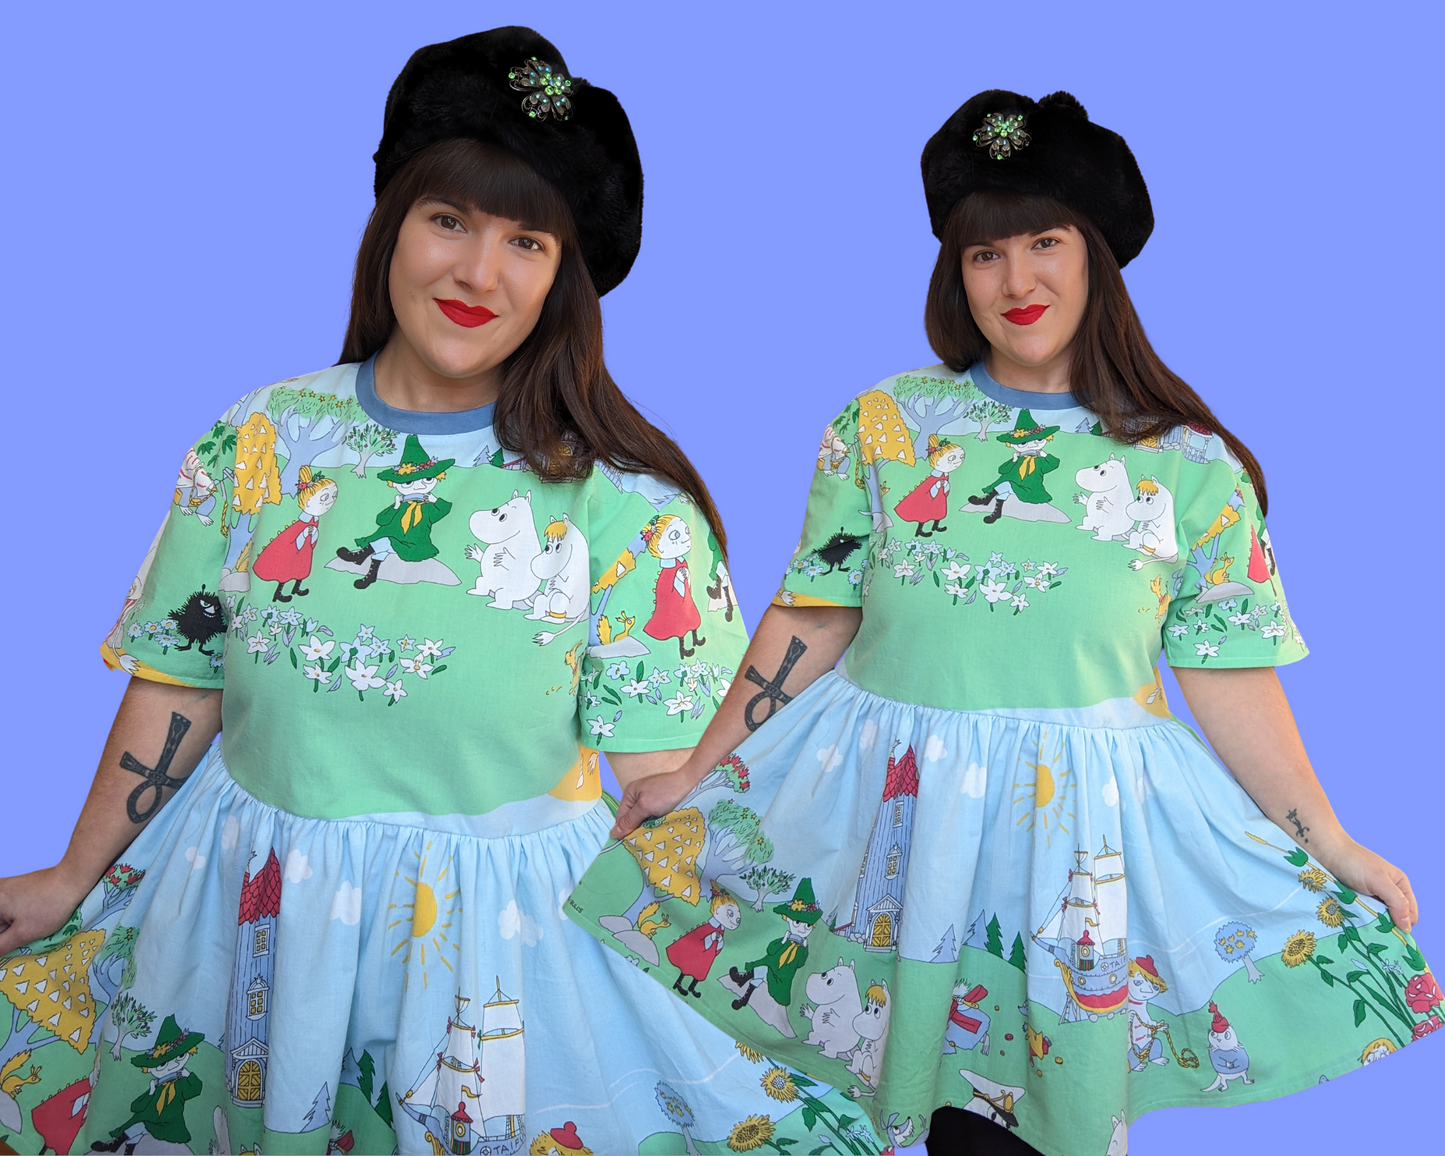 Handmade, Upcycled The Moomins Bedsheet T-Shirt Dress Fits S-M-L-XL